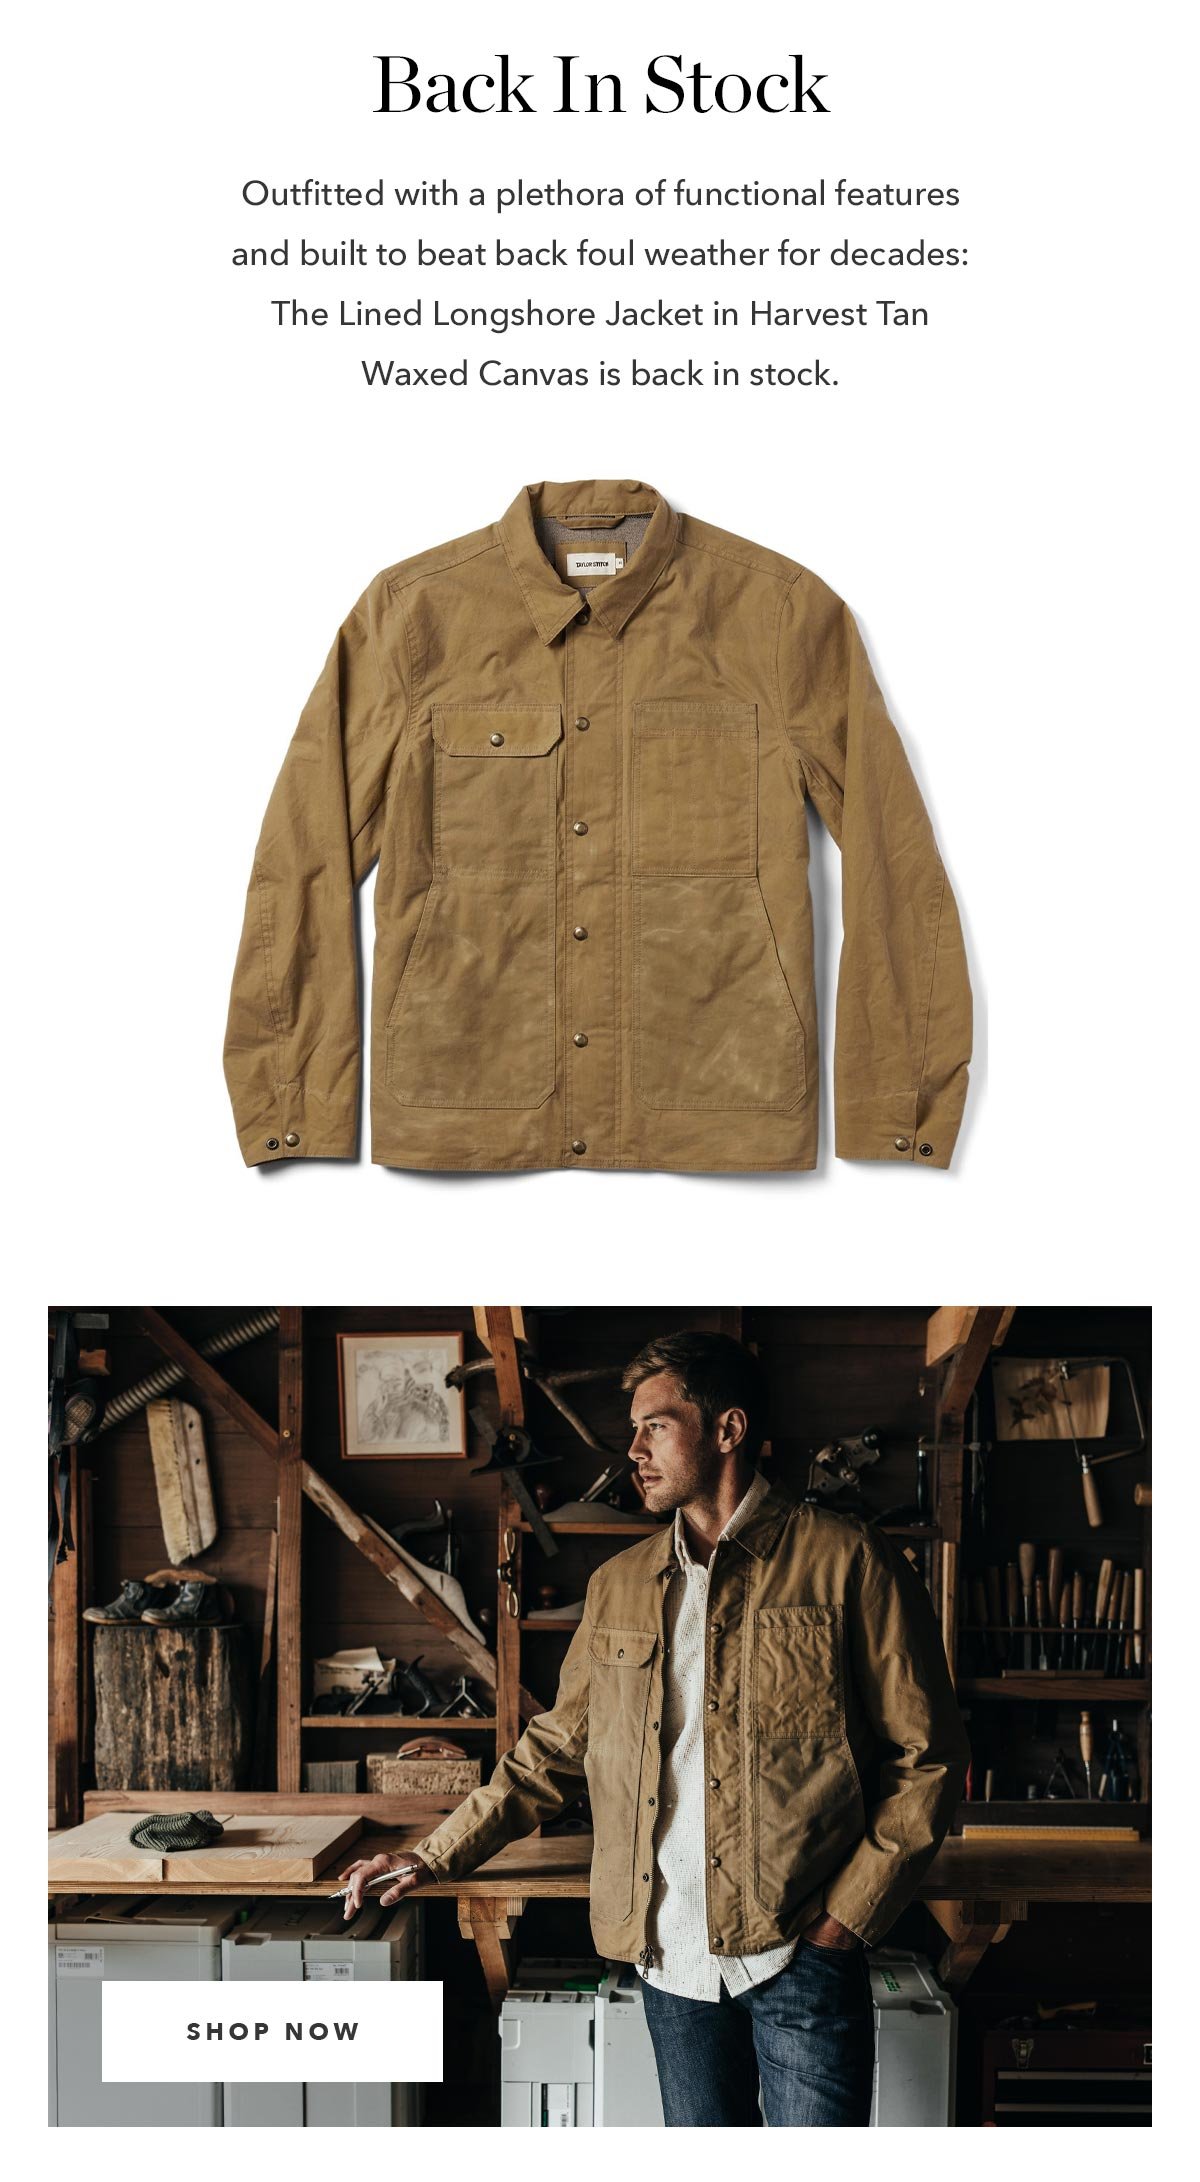 Outfitted with a plethora of functional features and built to beat back foul weather for decades: The Lined Longshore Jacket in Harvest Tan Waxed Canvas is back in stock.